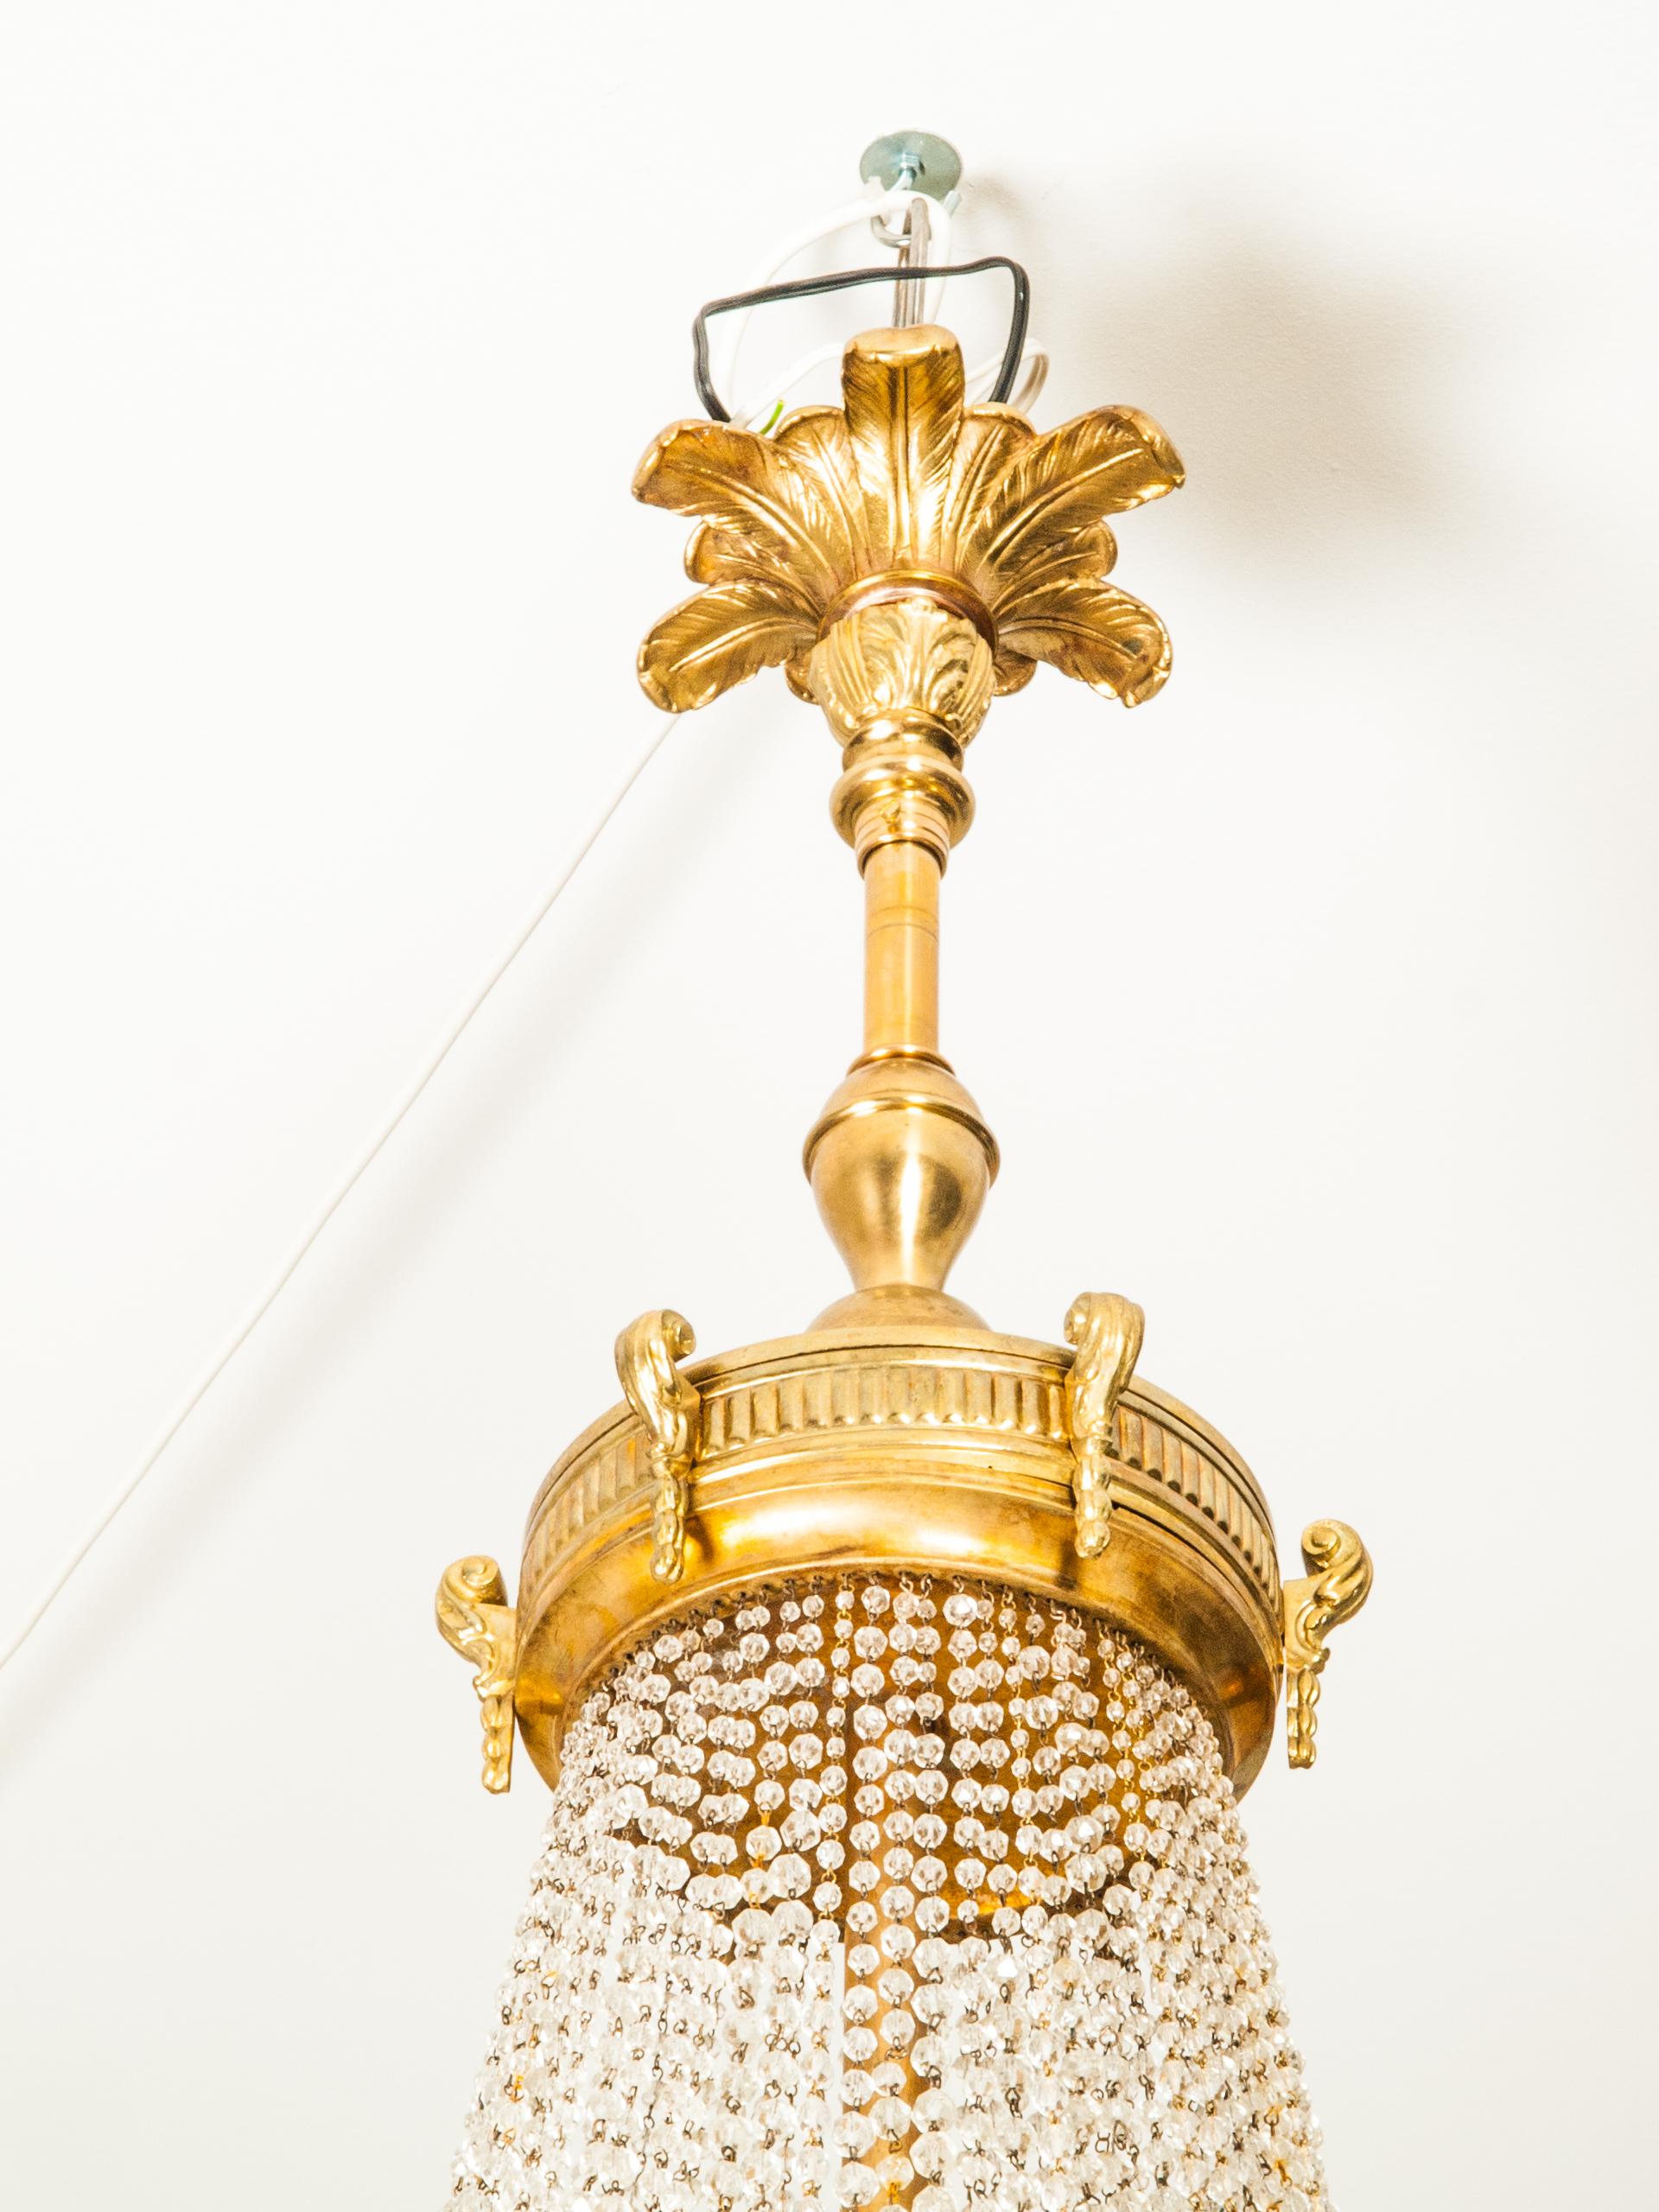 Antique Viennese gilt bronze six-light chandelier ormolu frame decorated with flower garland.
All arms in shape of flower buds carry bulbs. Basket is surrounded with suspended chains of graduated handcut crystal pearls inside the basket are six